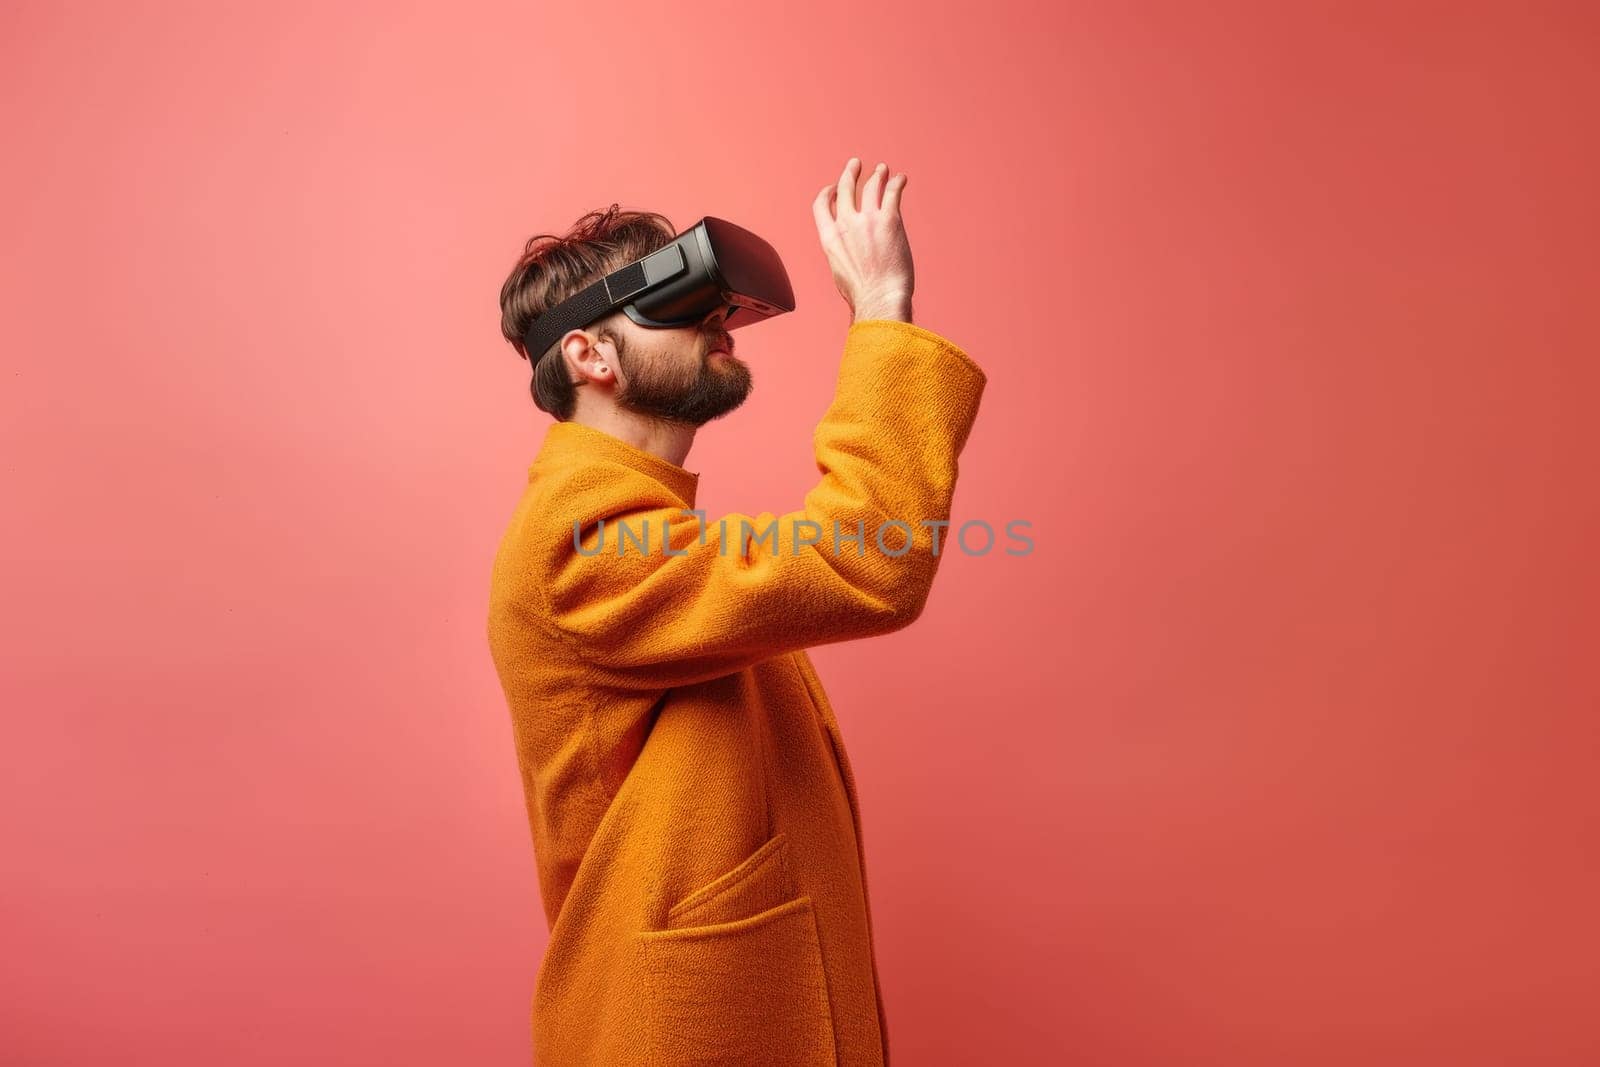 A man in a yellow coat is wearing a virtual reality headset. He is looking up and he is in a playful mood